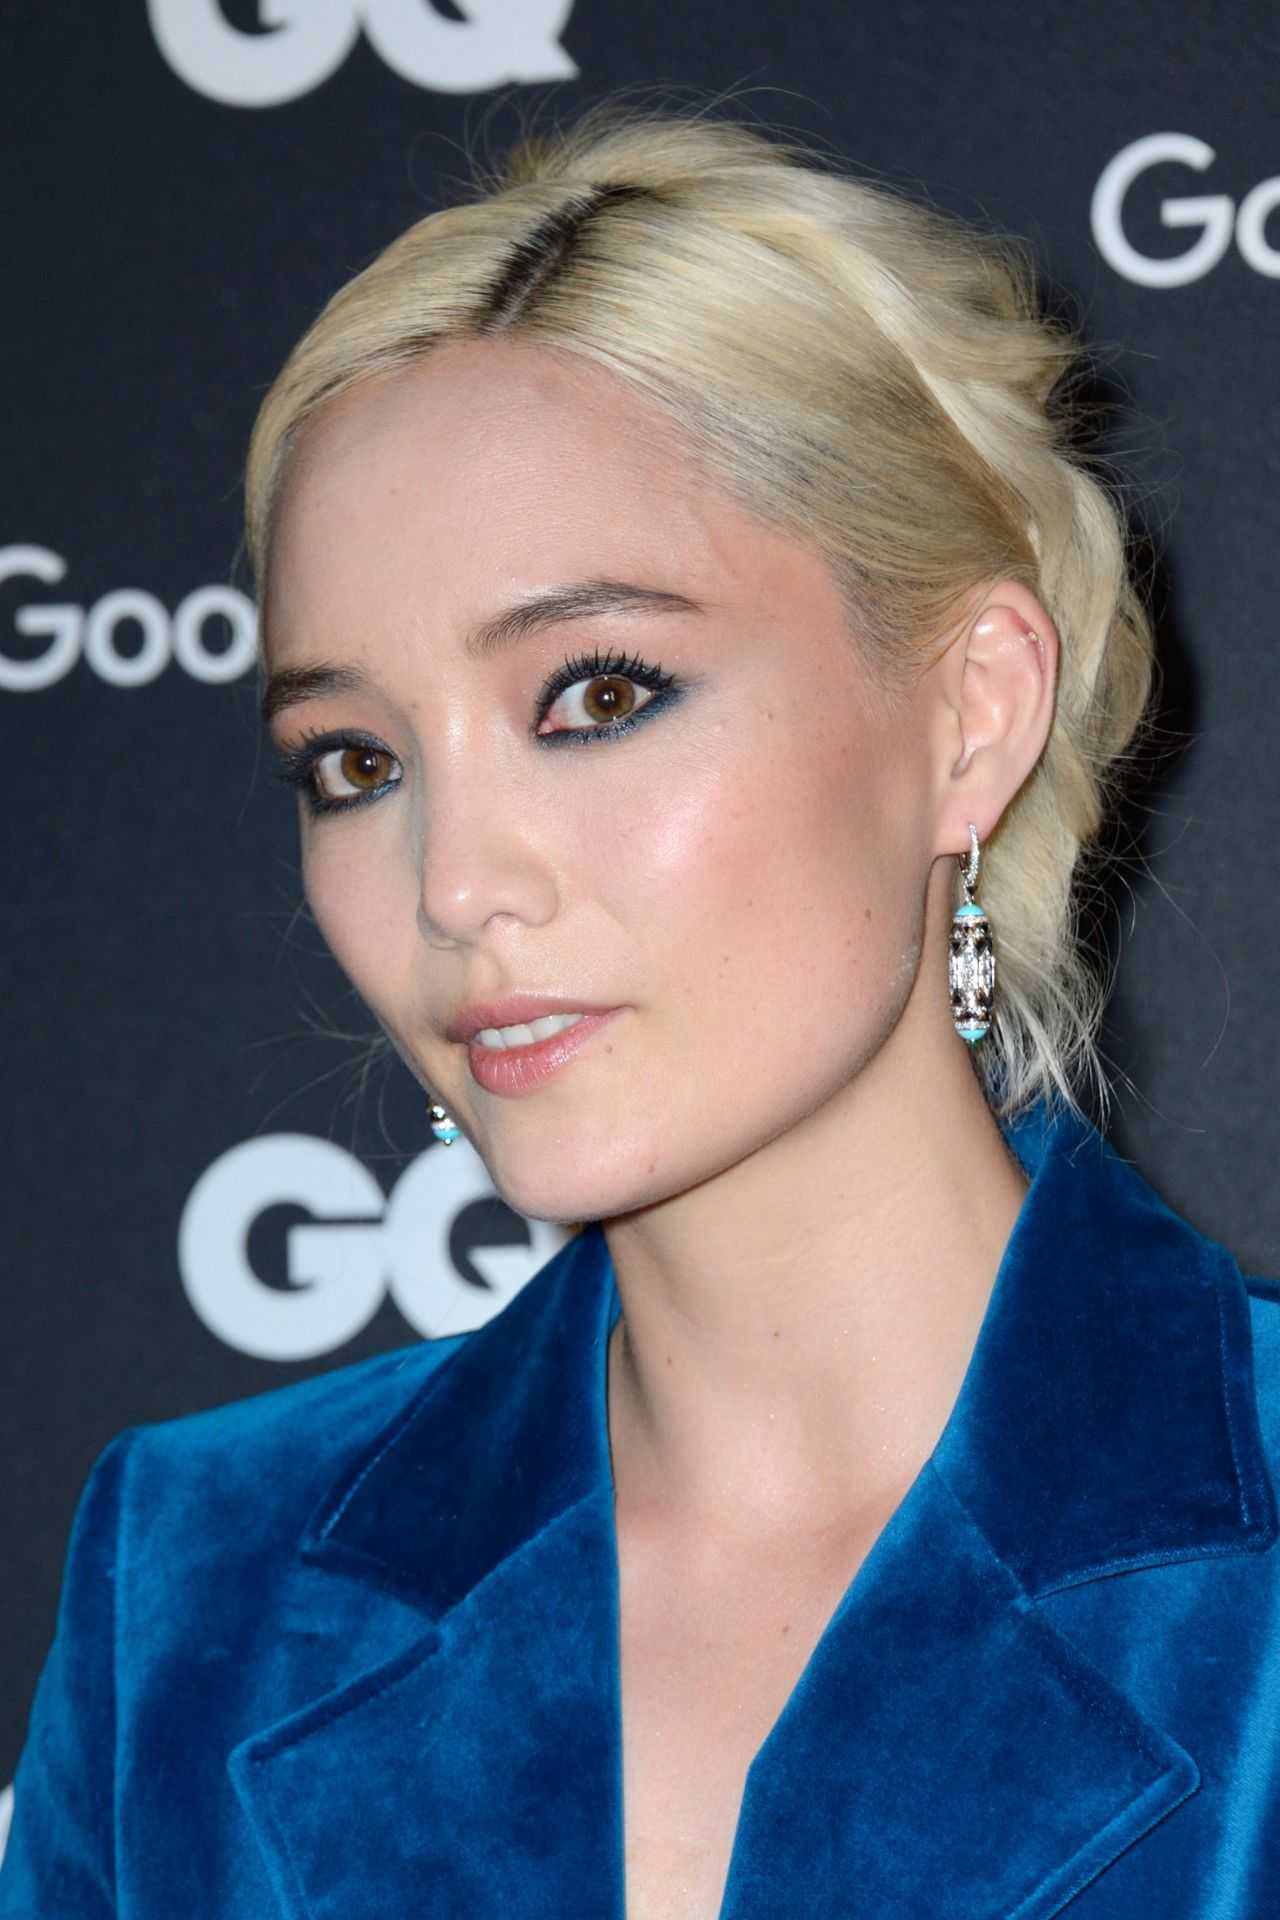 70+ Hot Pictures Of Pom Klementieff Who Plays Mantis In Marvel Cinematic Universe 132